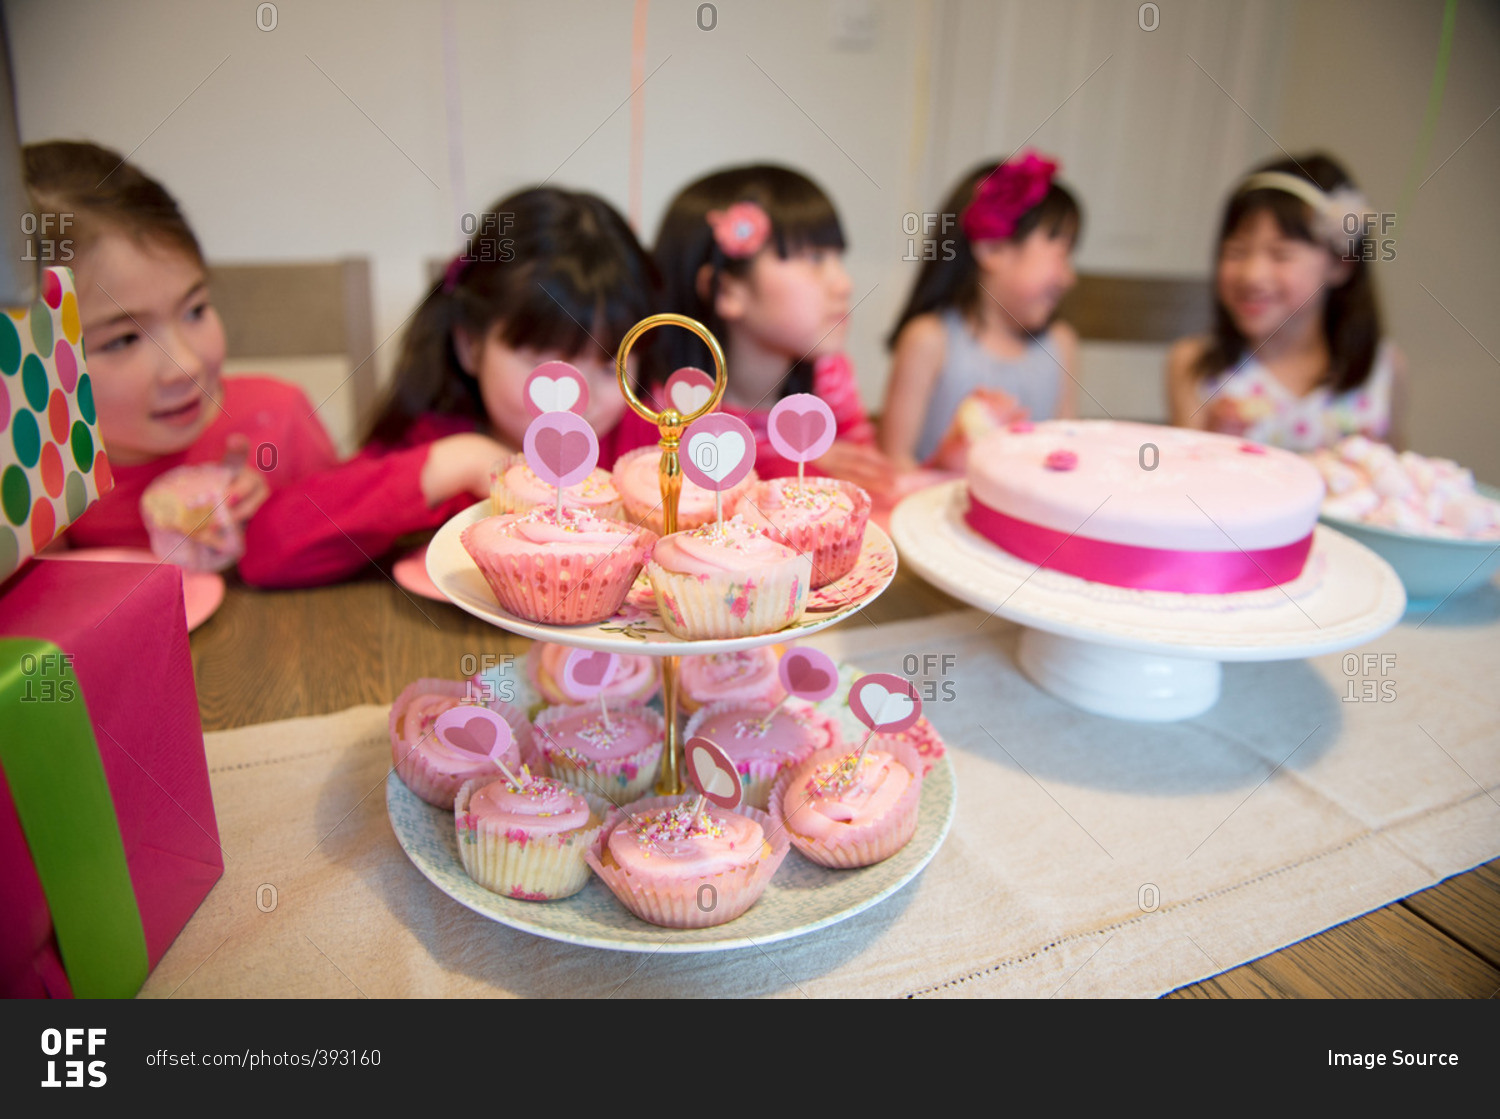 Fairy cakes at girl's birthday party